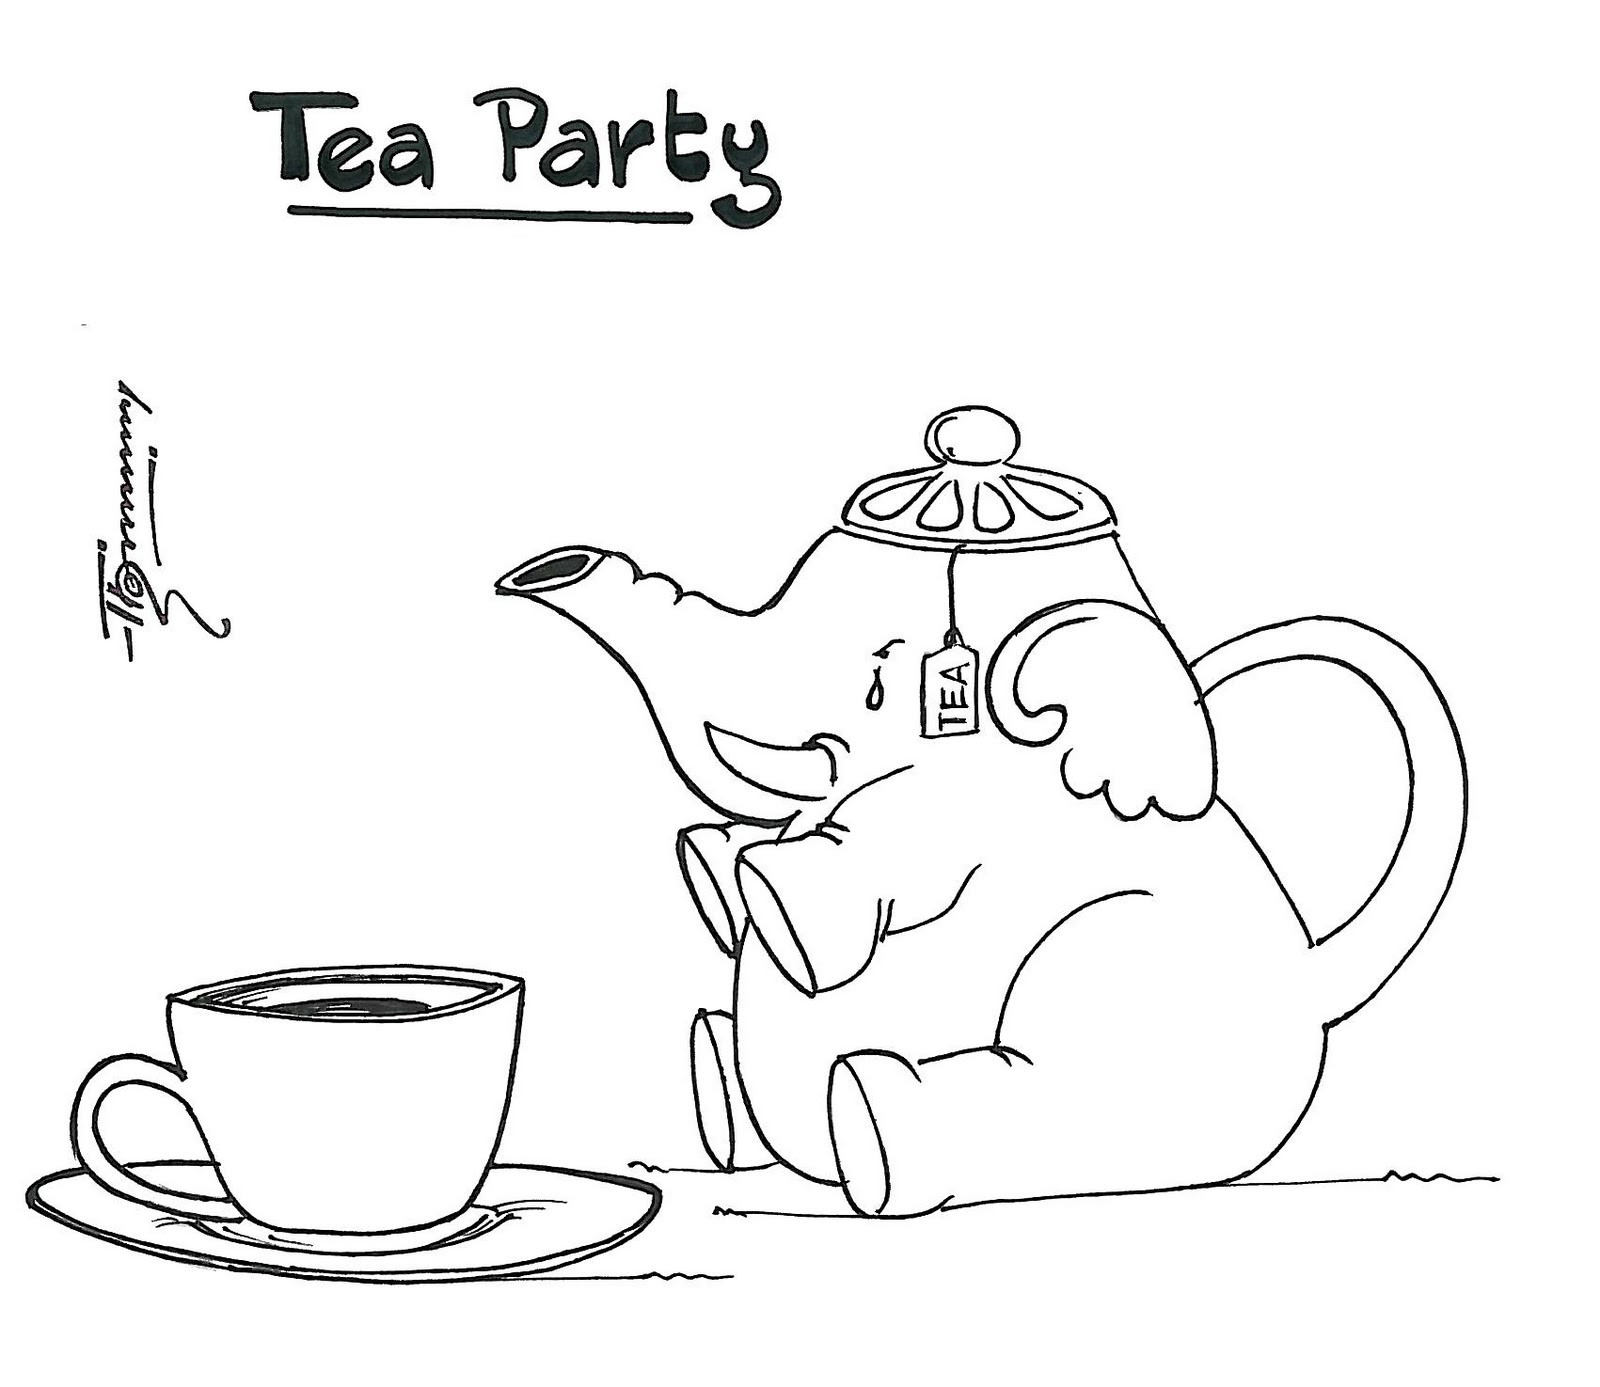 Republican Tea Party Ideas
 Drawn Opinions © Tea Party and Republicans